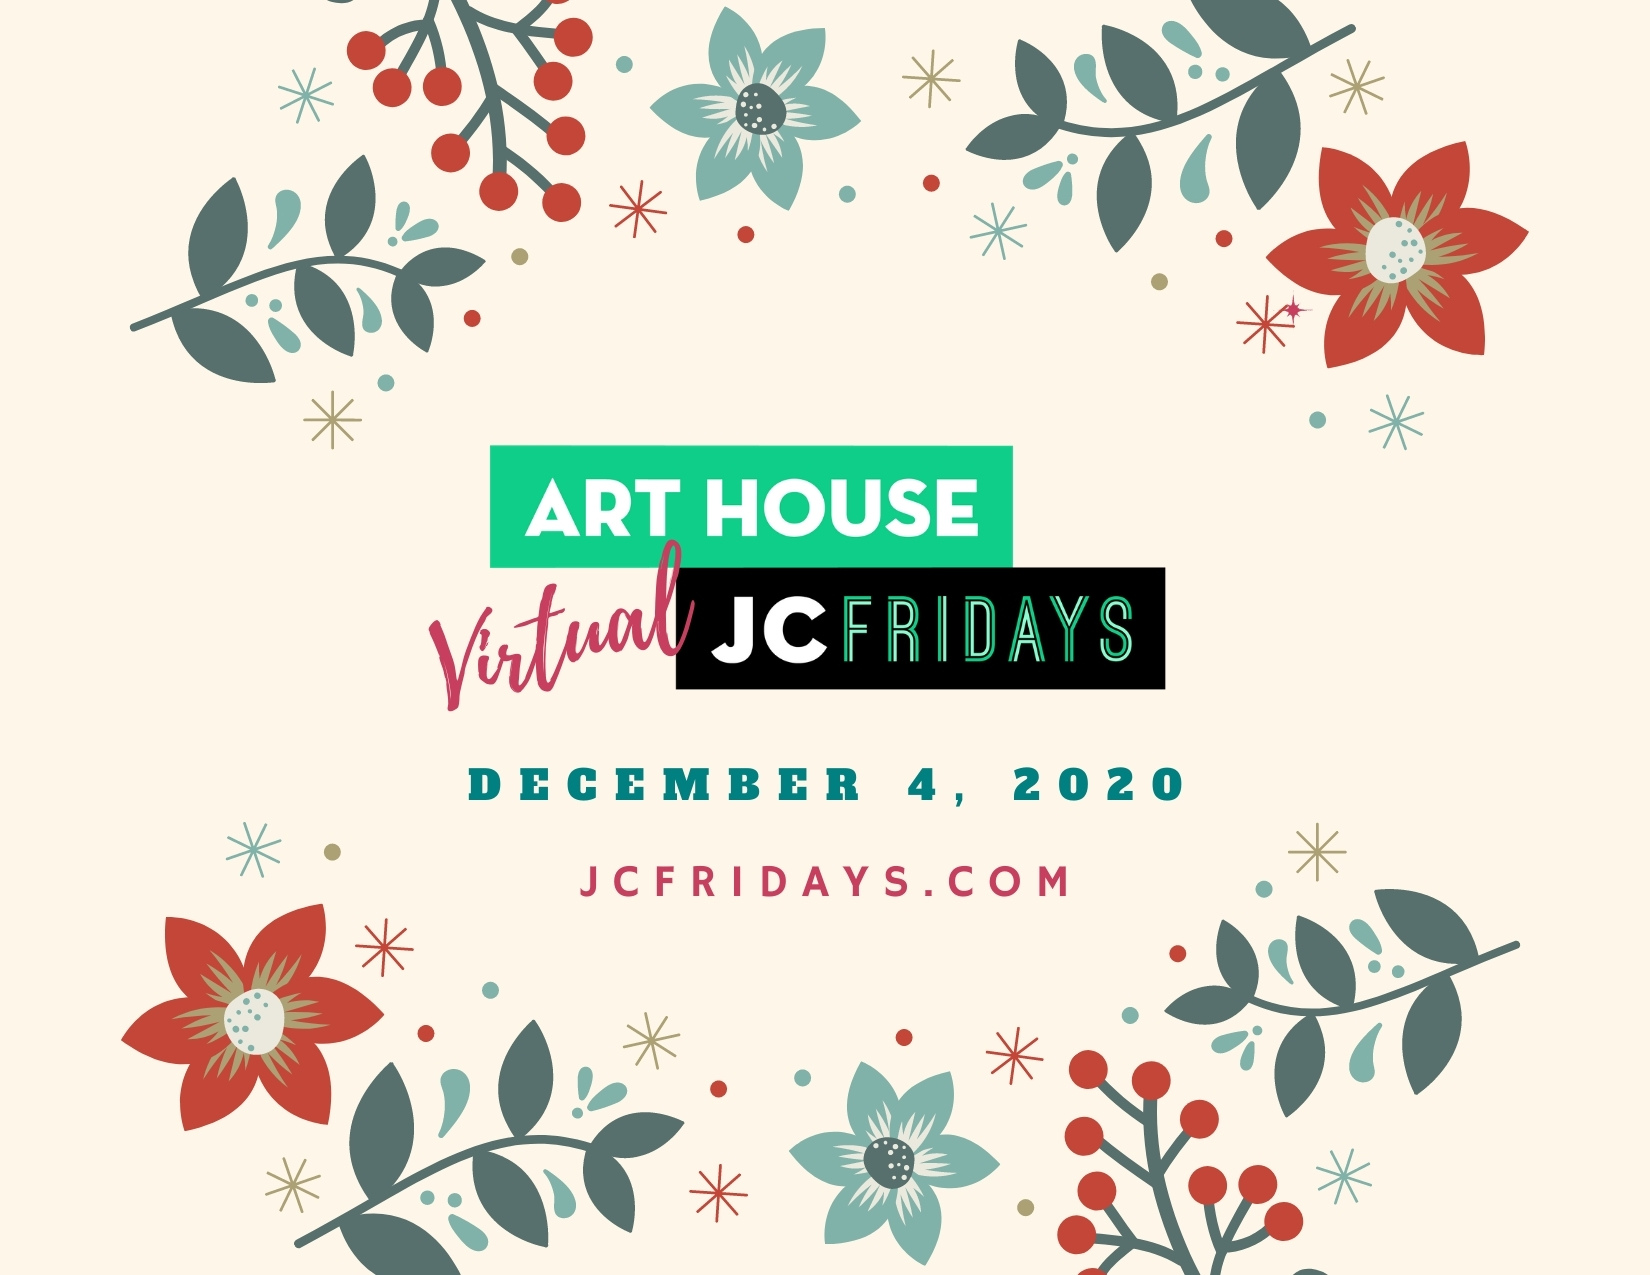 Art House Virtual JC Fridaysflyer. Cream background floral bordere in muted tones of green teal & red. Wordage detailing event in center